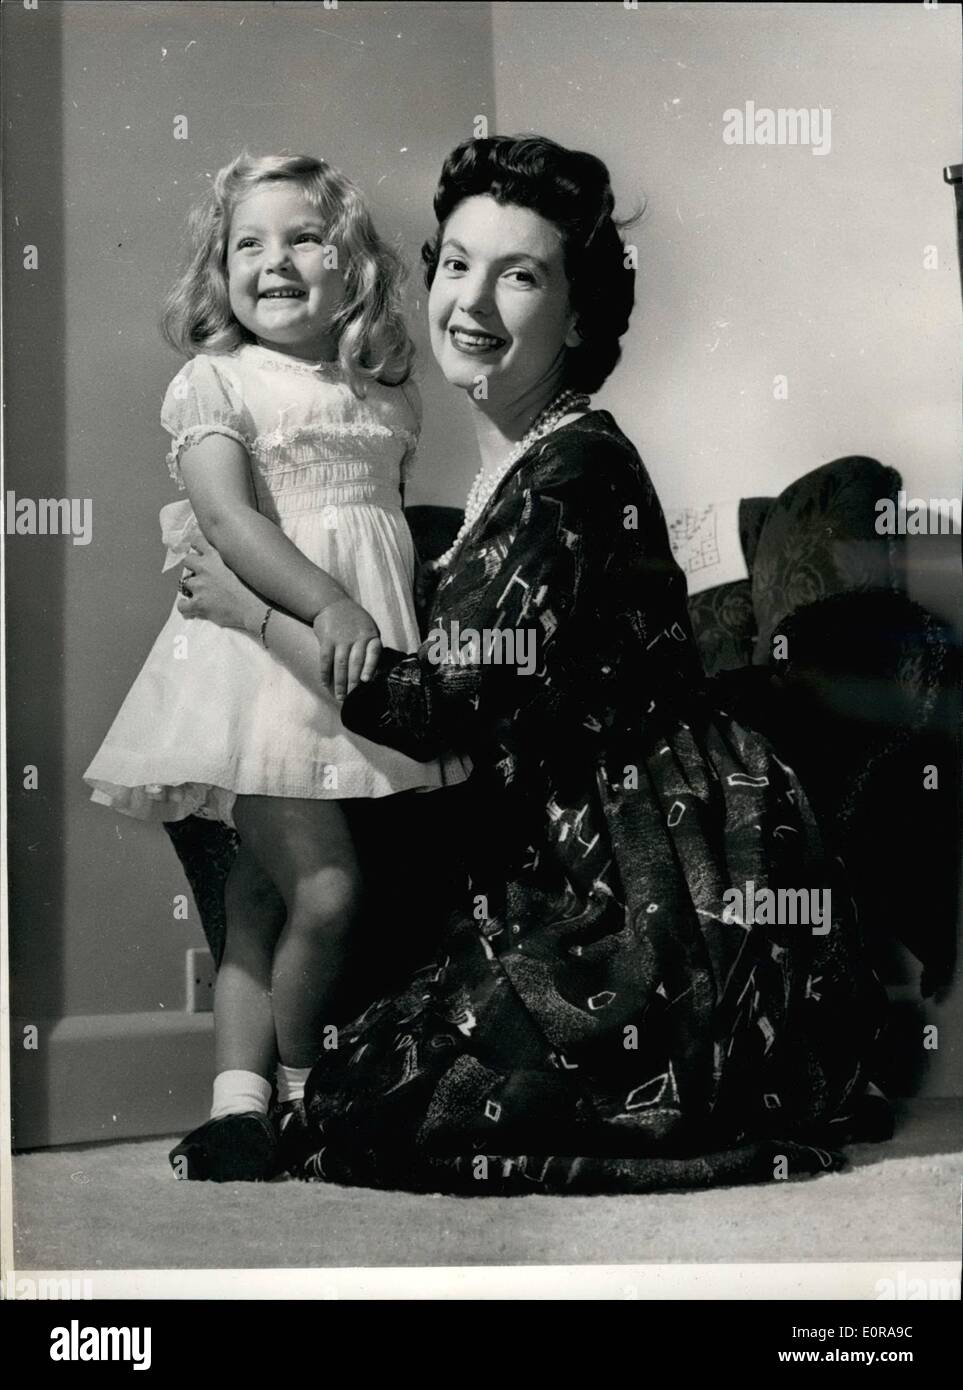 Nov. 11, 1958 - Sylvia Peters To Leave The B.B.C. She Wants To Spend More Time With Her Daughter: Britain's best known woman TV Stock Photo